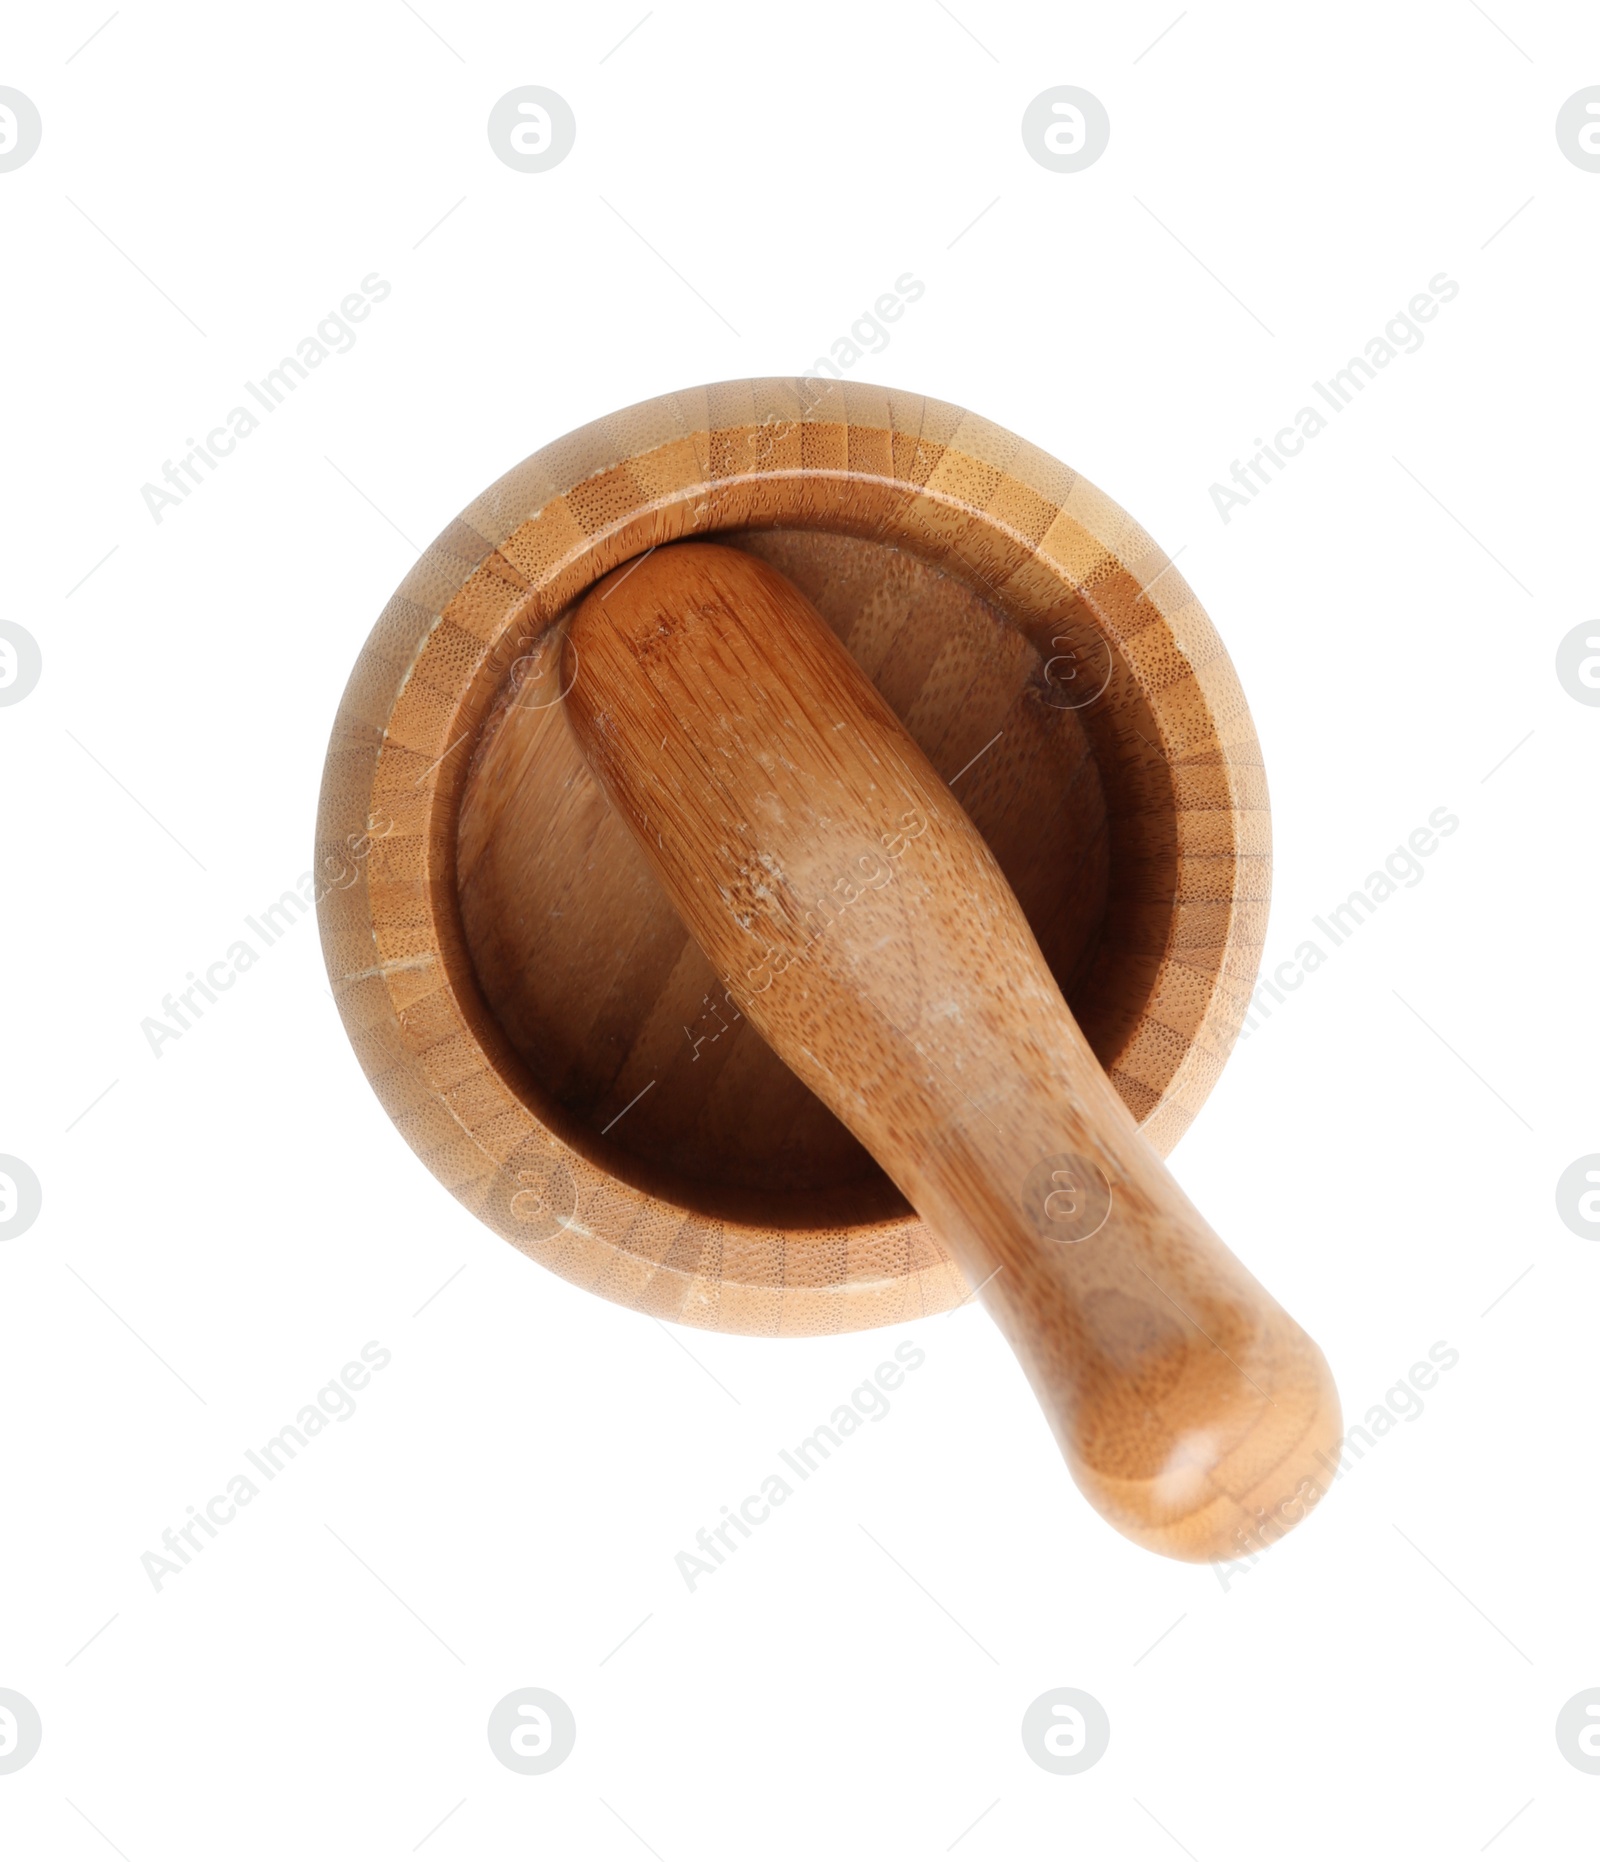 Photo of Wooden mortar and pestle isolated on white, top view. Cooking utensils